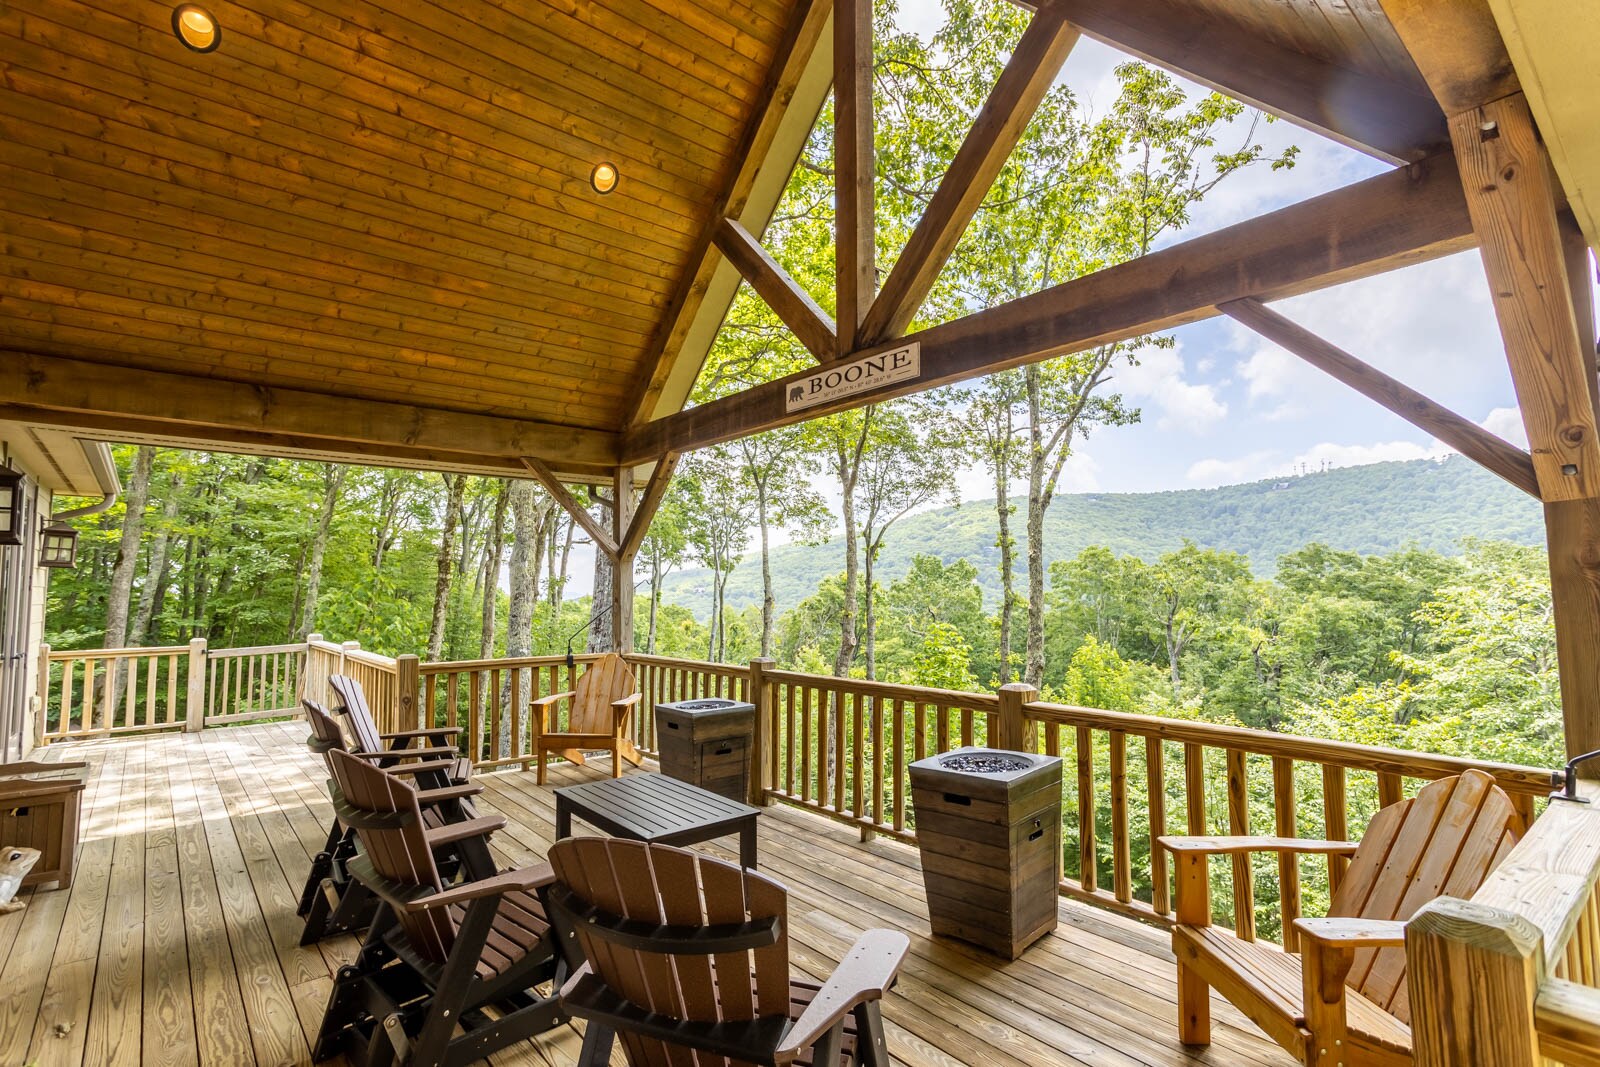 Blue Ridge Mountain Views from Furnished Covered Deck